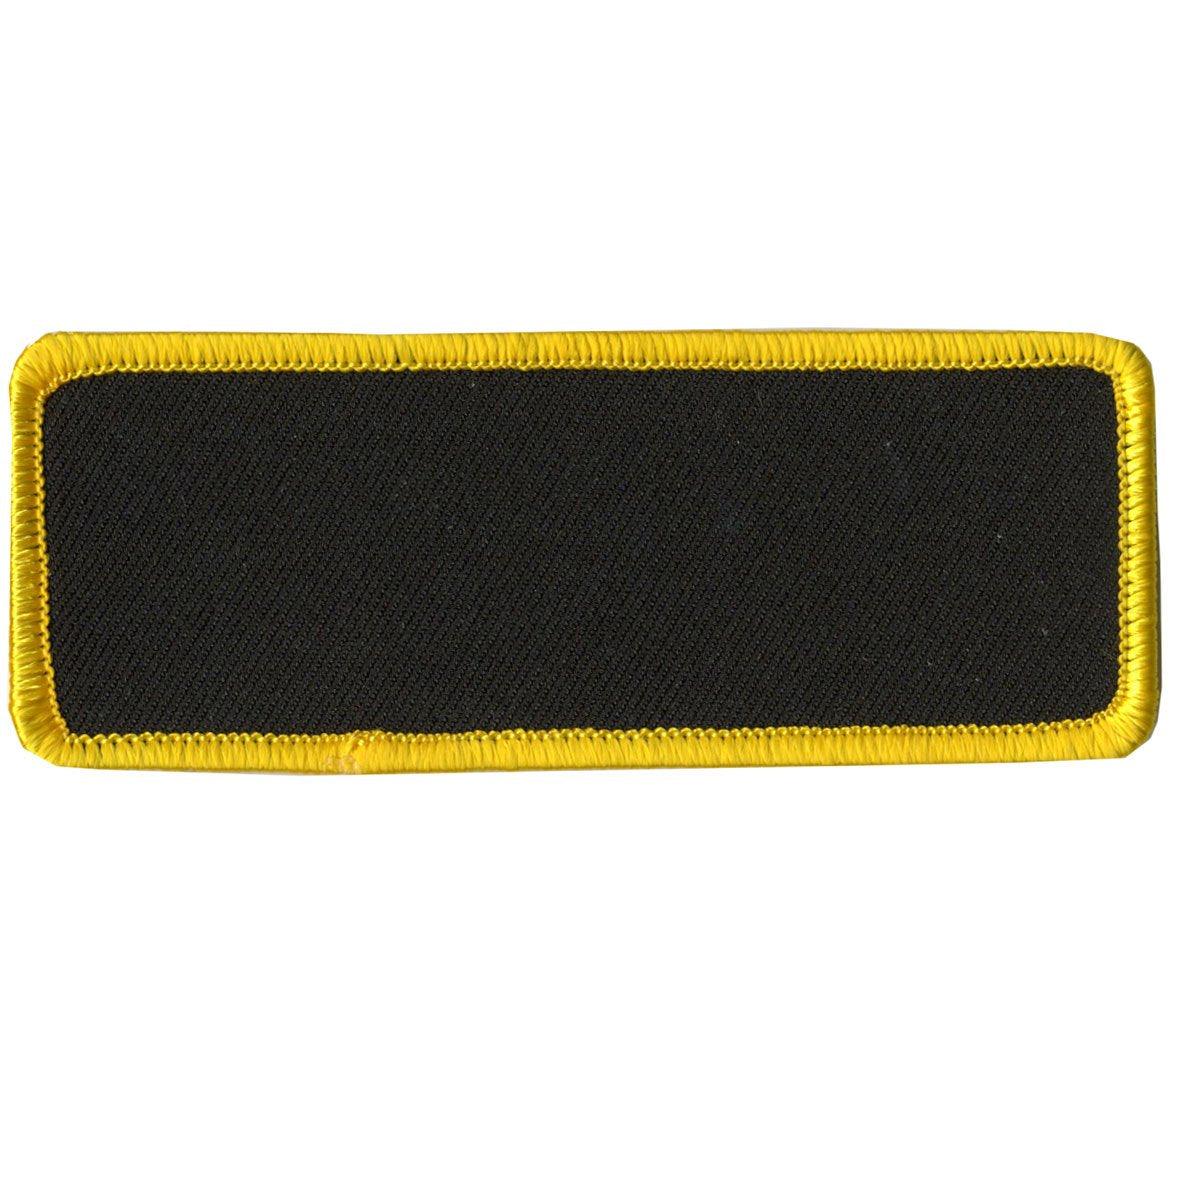 Hot Leathers Blank W/ Yellow Trim 4" X 1.5" Patch - American Legend Rider